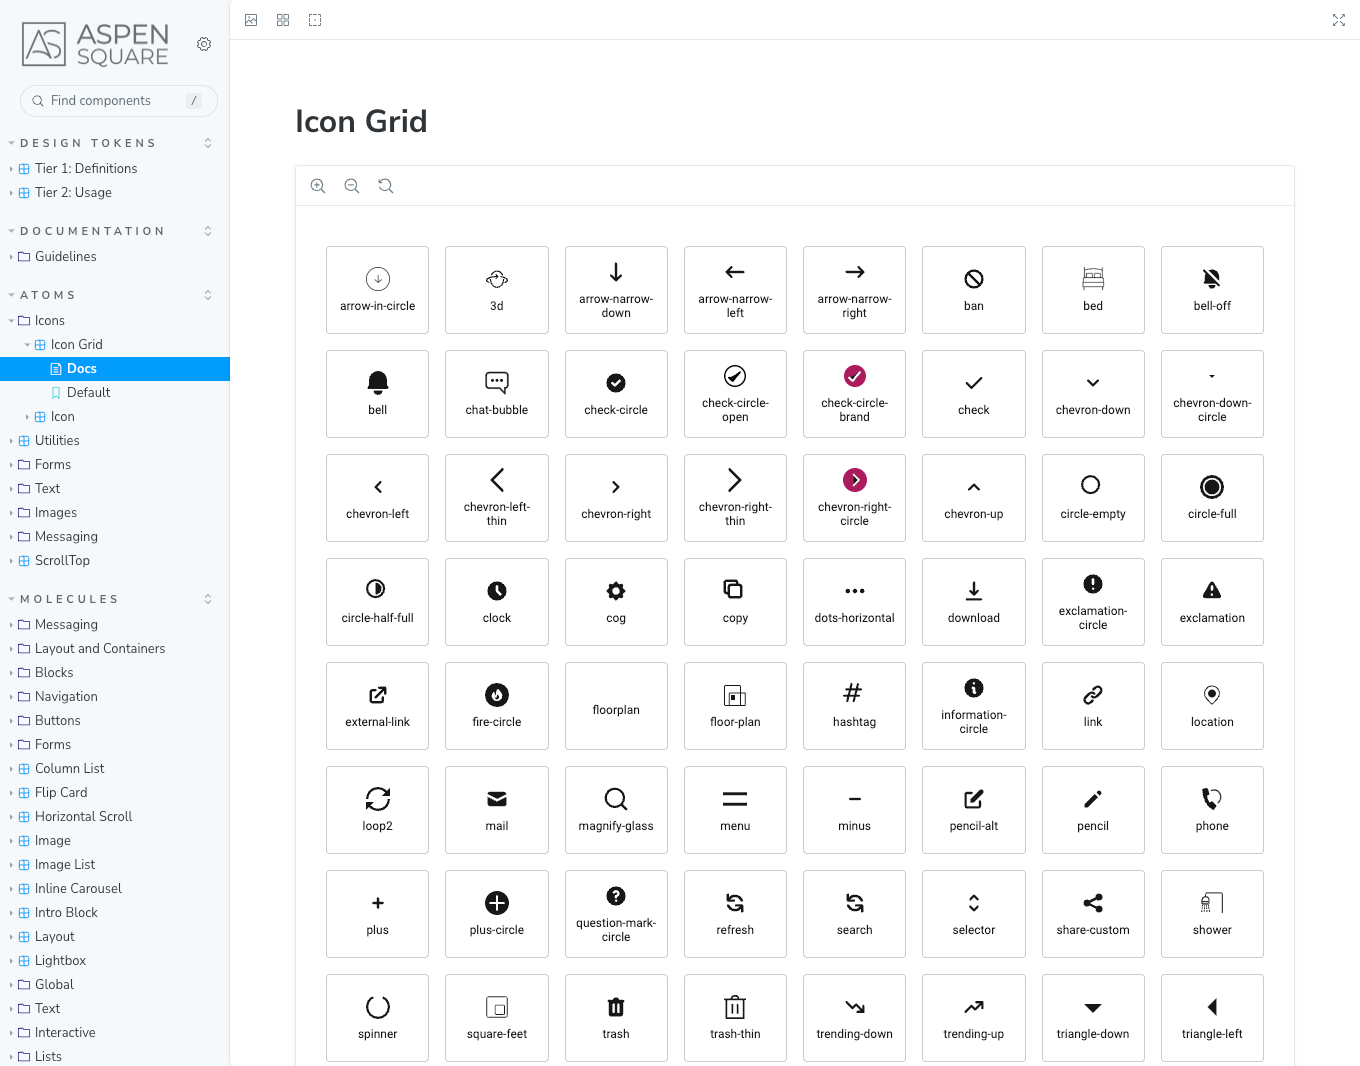 Icon grid displaying the various design system icons